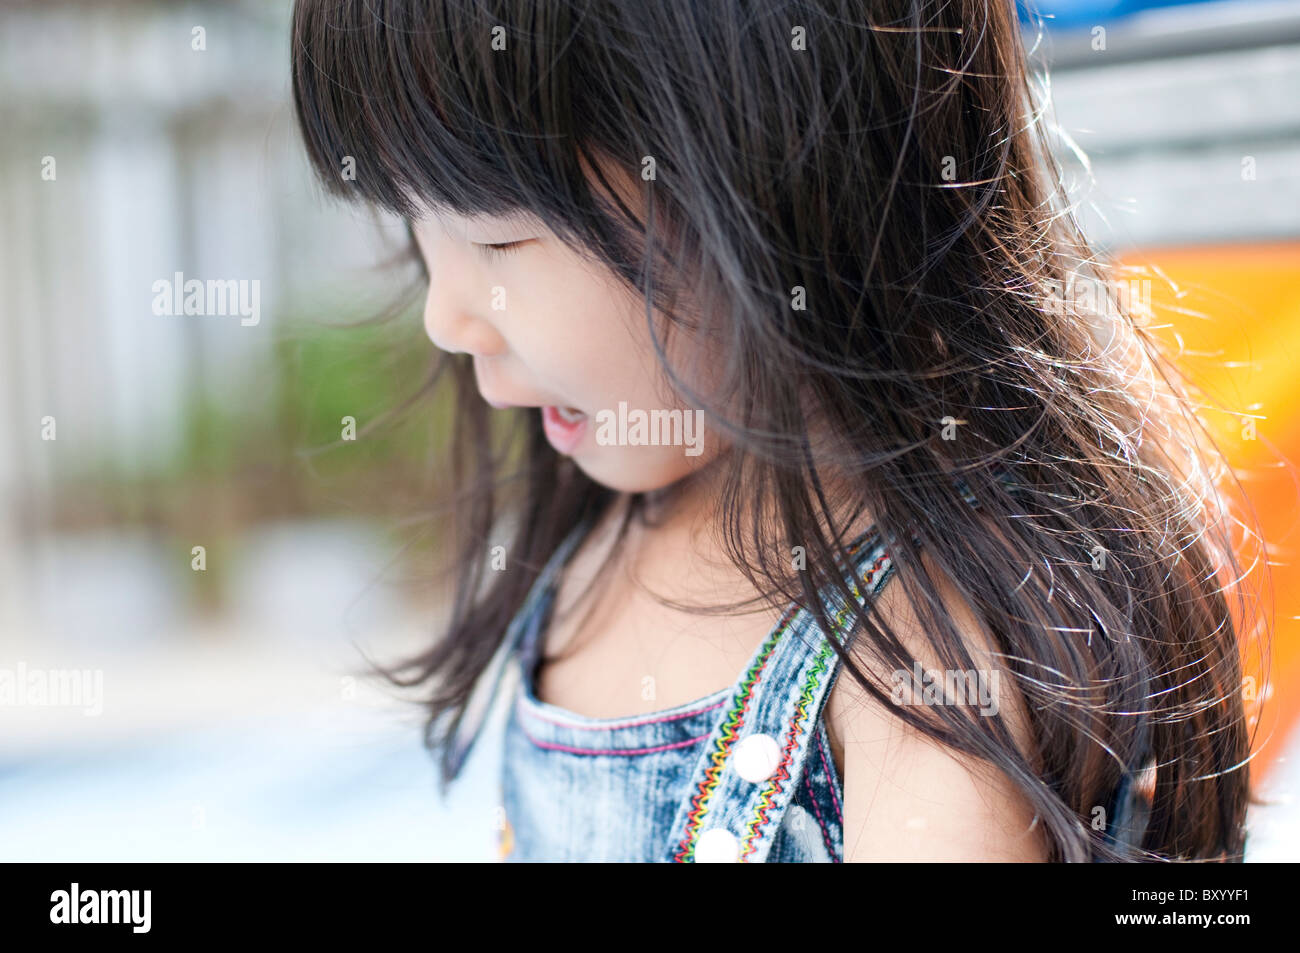 Candid moment of little Asian girl having fun in playground. Stock Photo